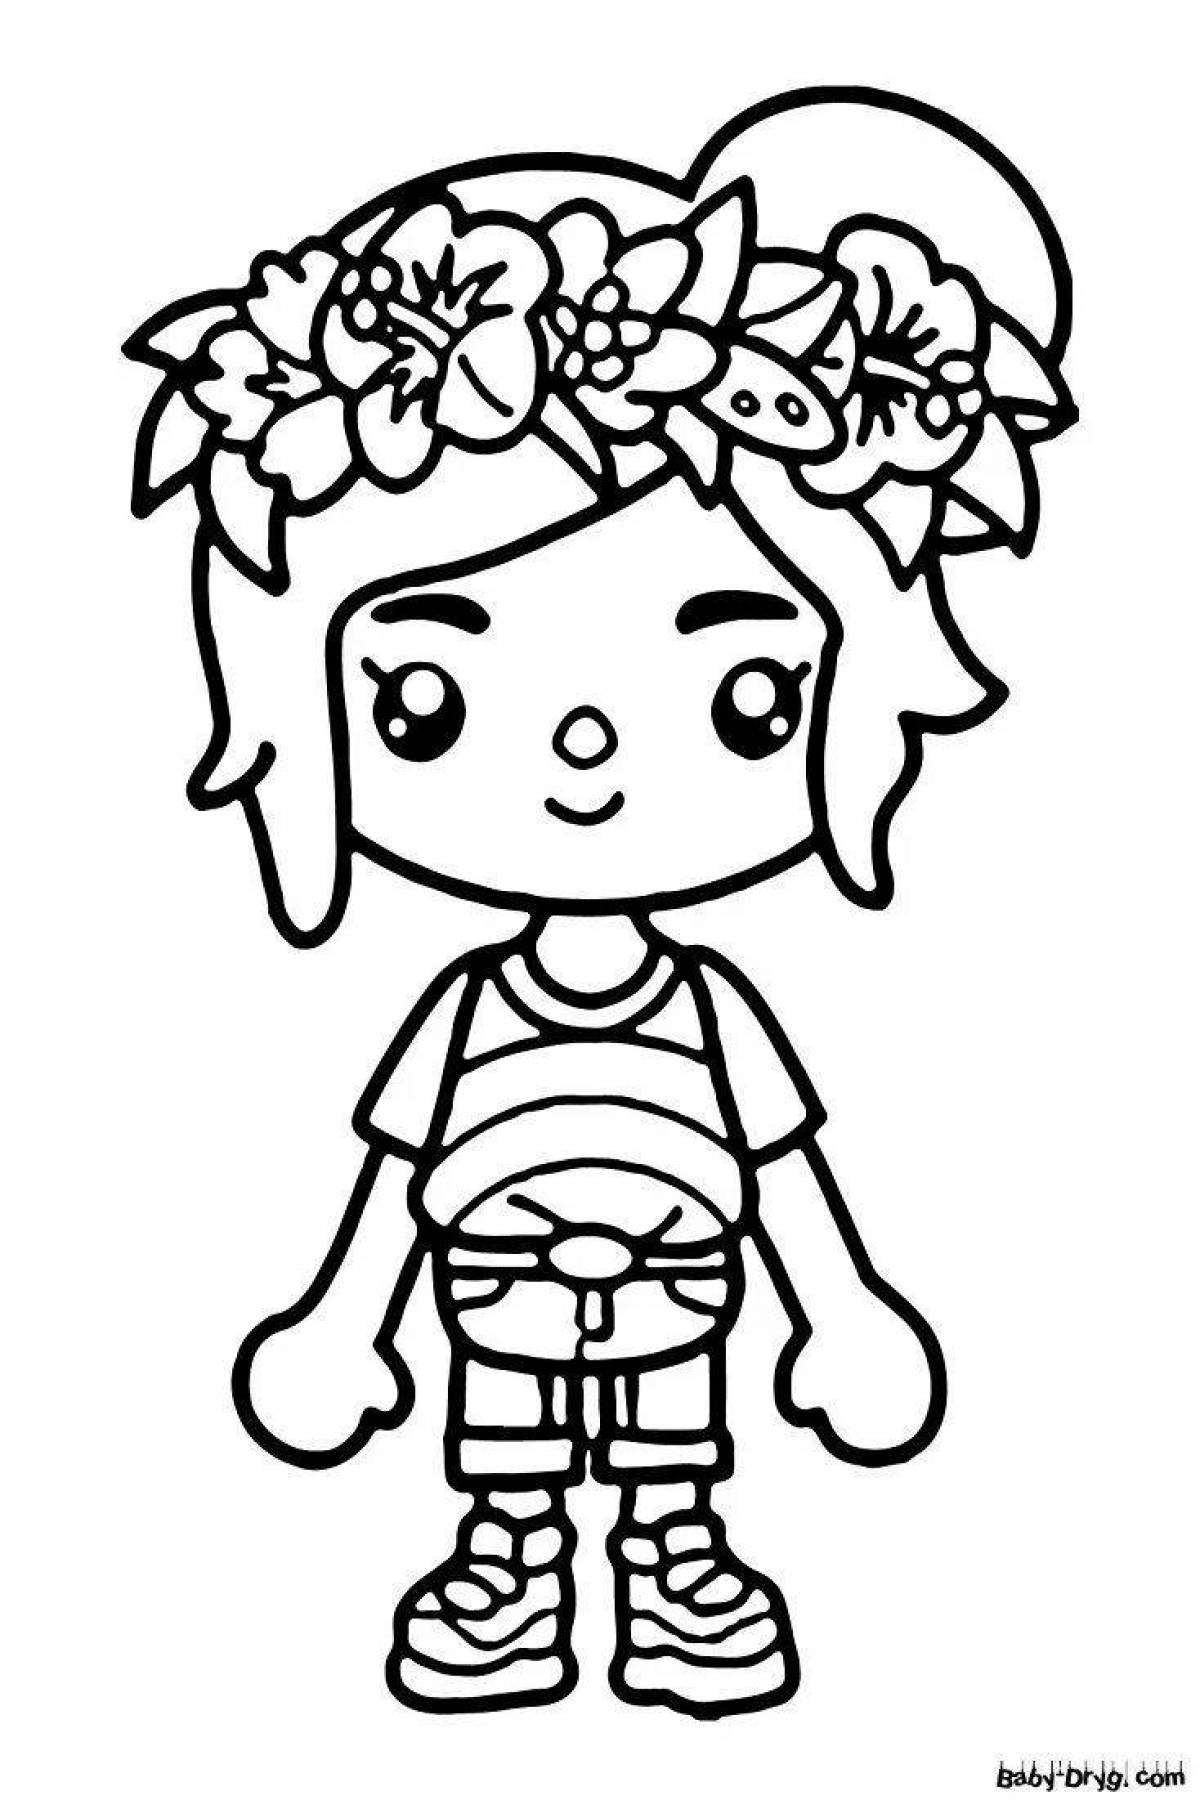 Togo boko's playful coloring page